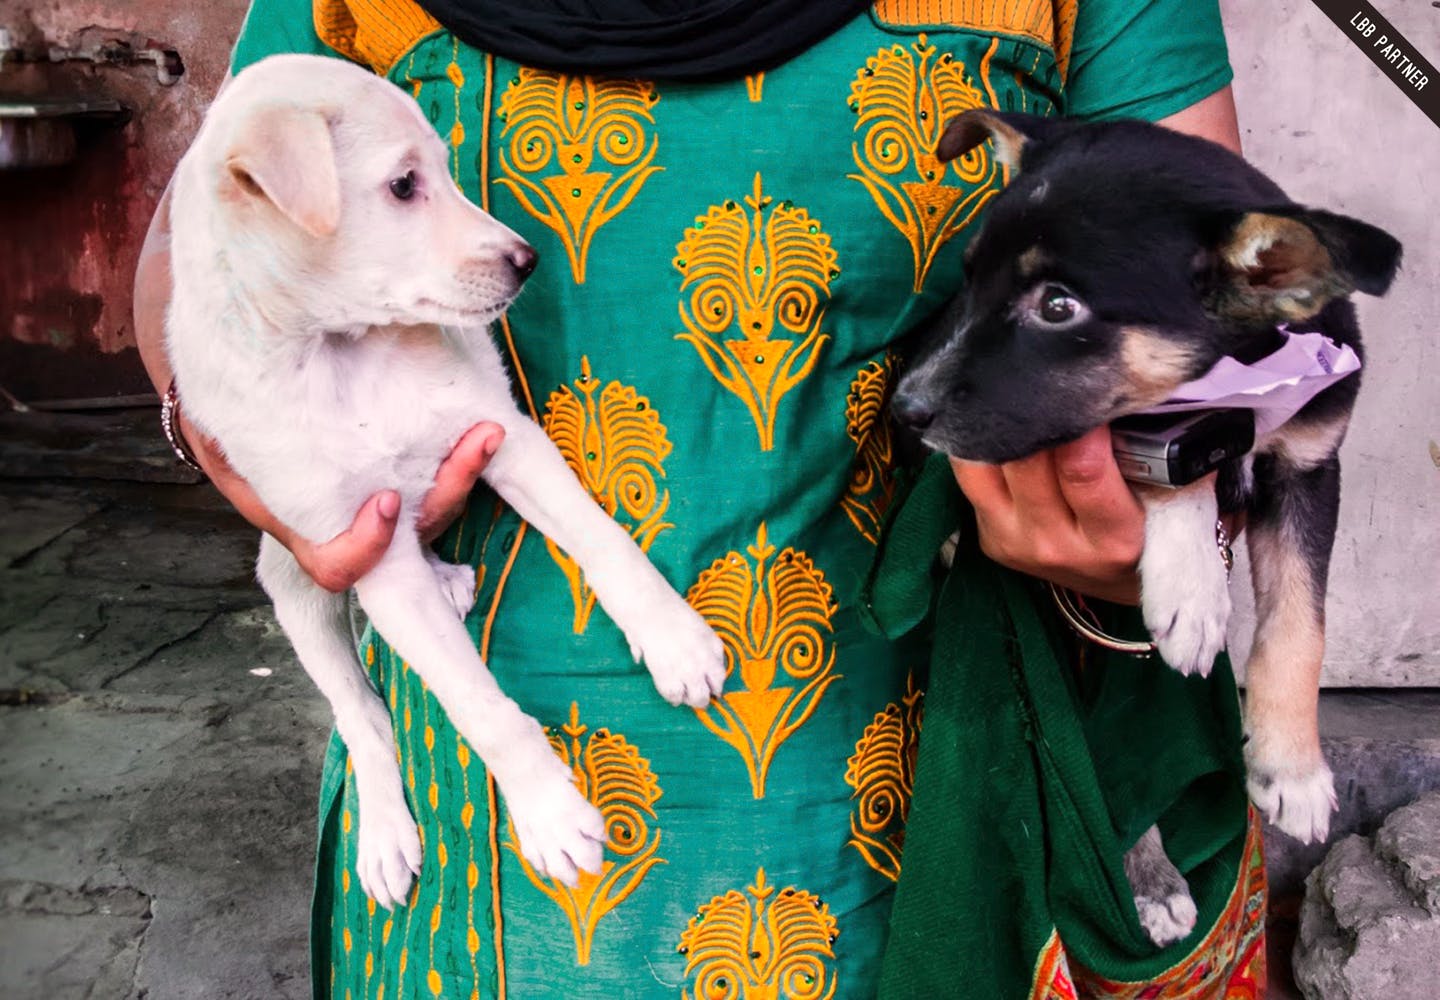 Adopt A Pet: Stories From Animal Shelters In Delhi | LBB, Delhi